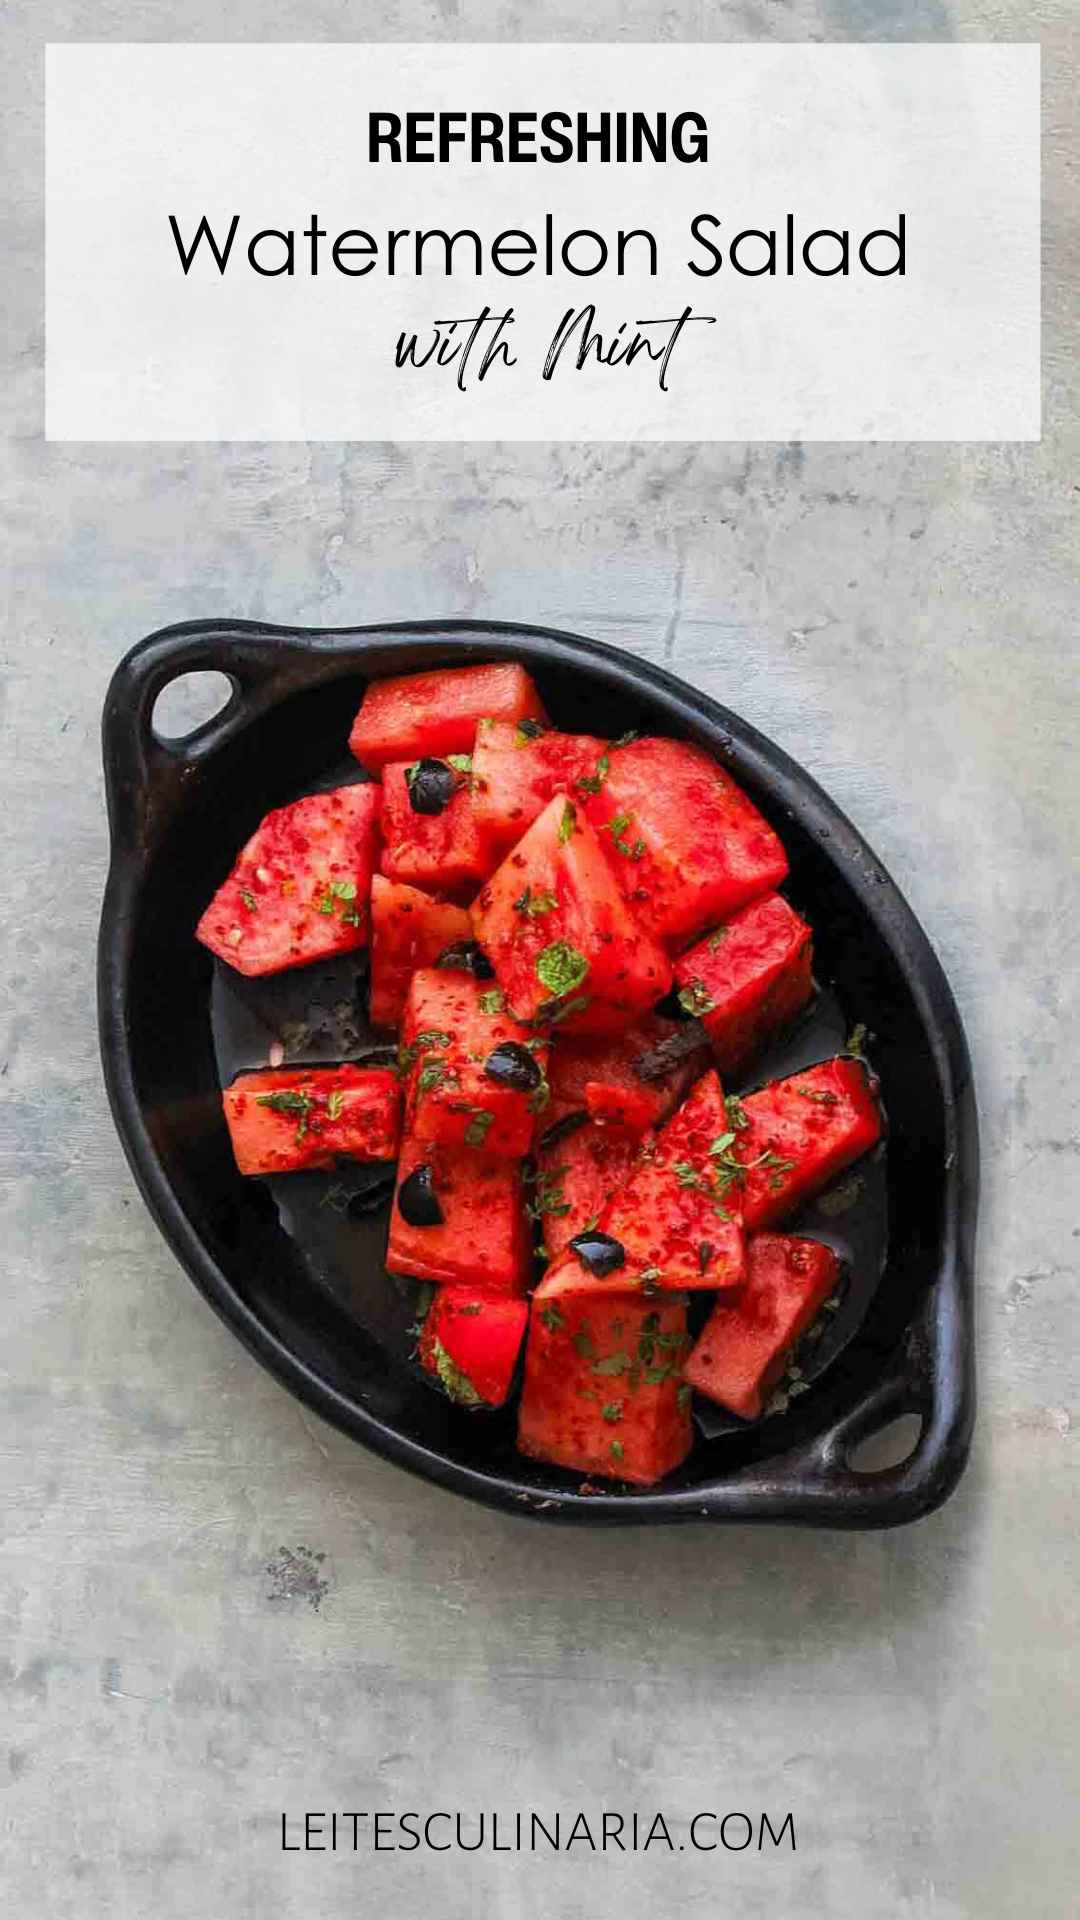 A black dish filled with cubes of fresh watermelon, chopped black olives, and fresh mint leaves.